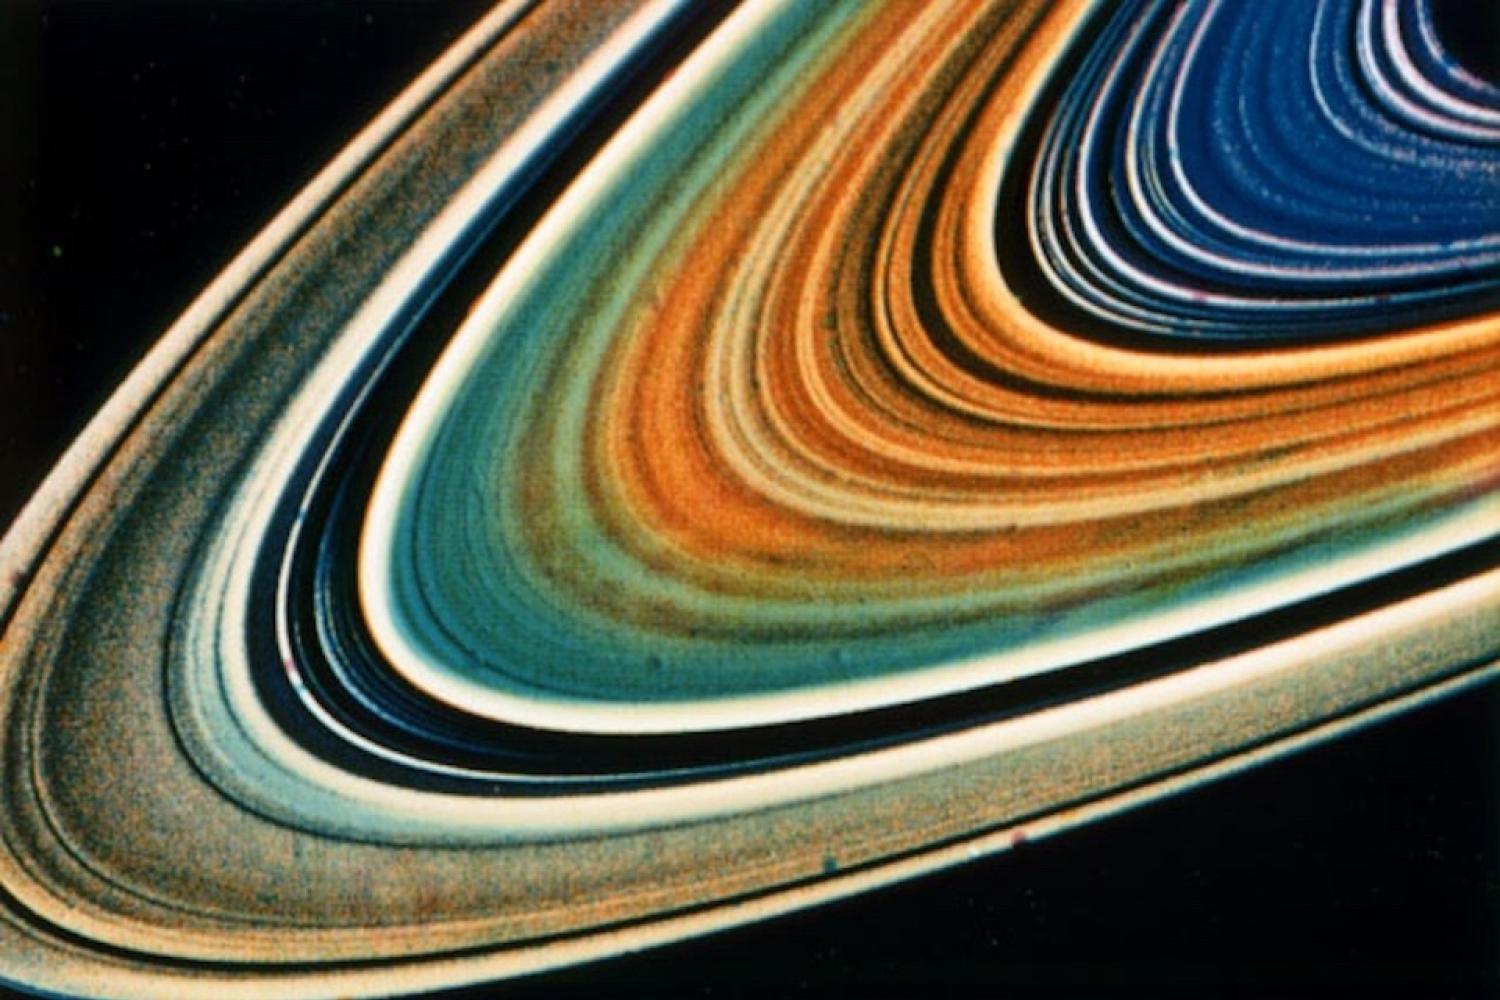 Colorful rings in space